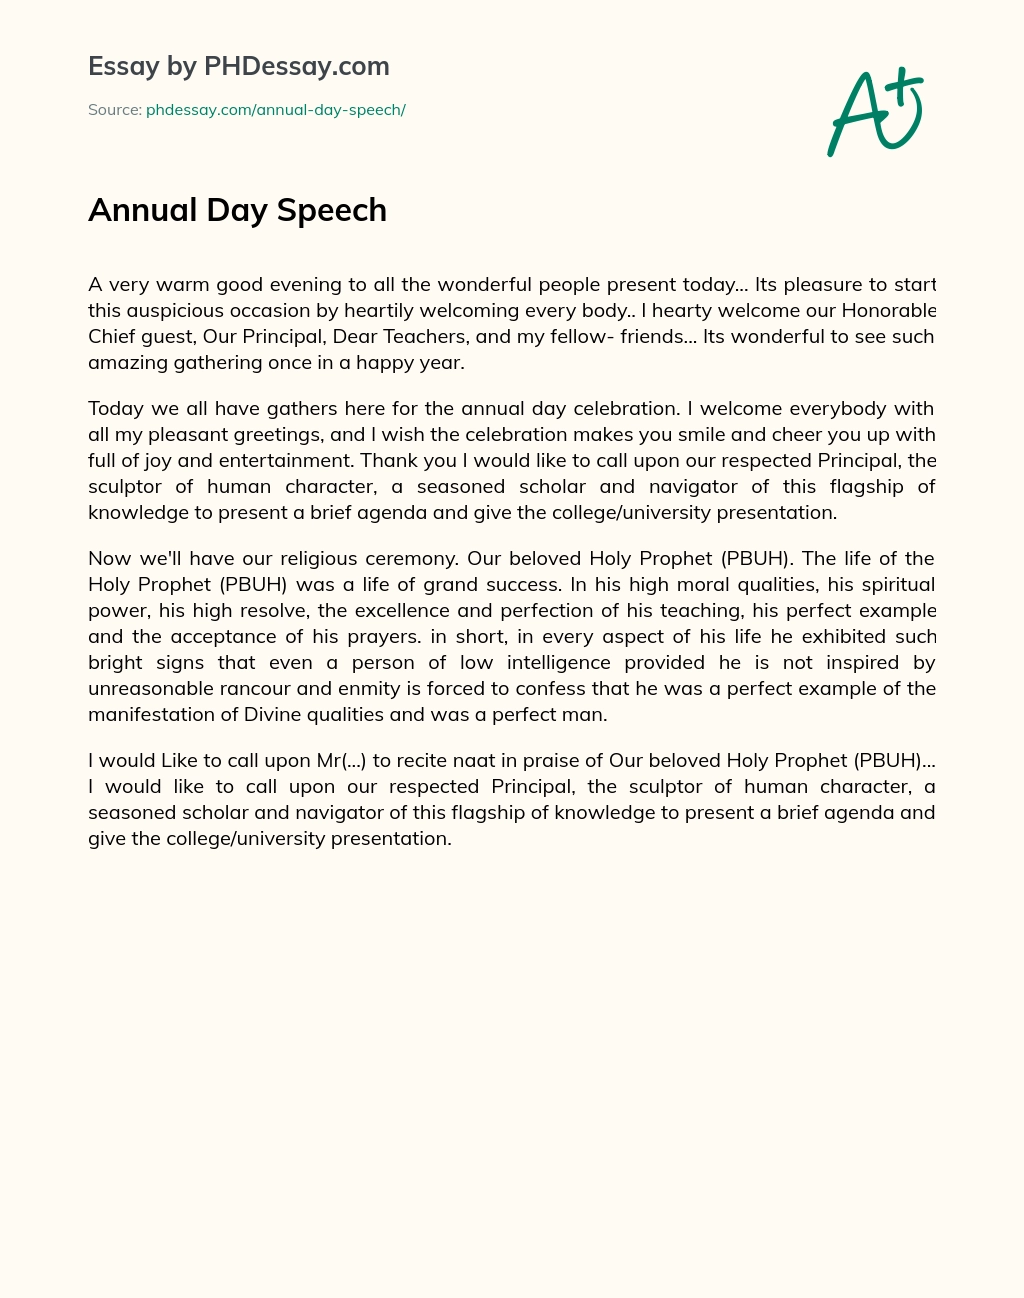 welcome speech for school annual day